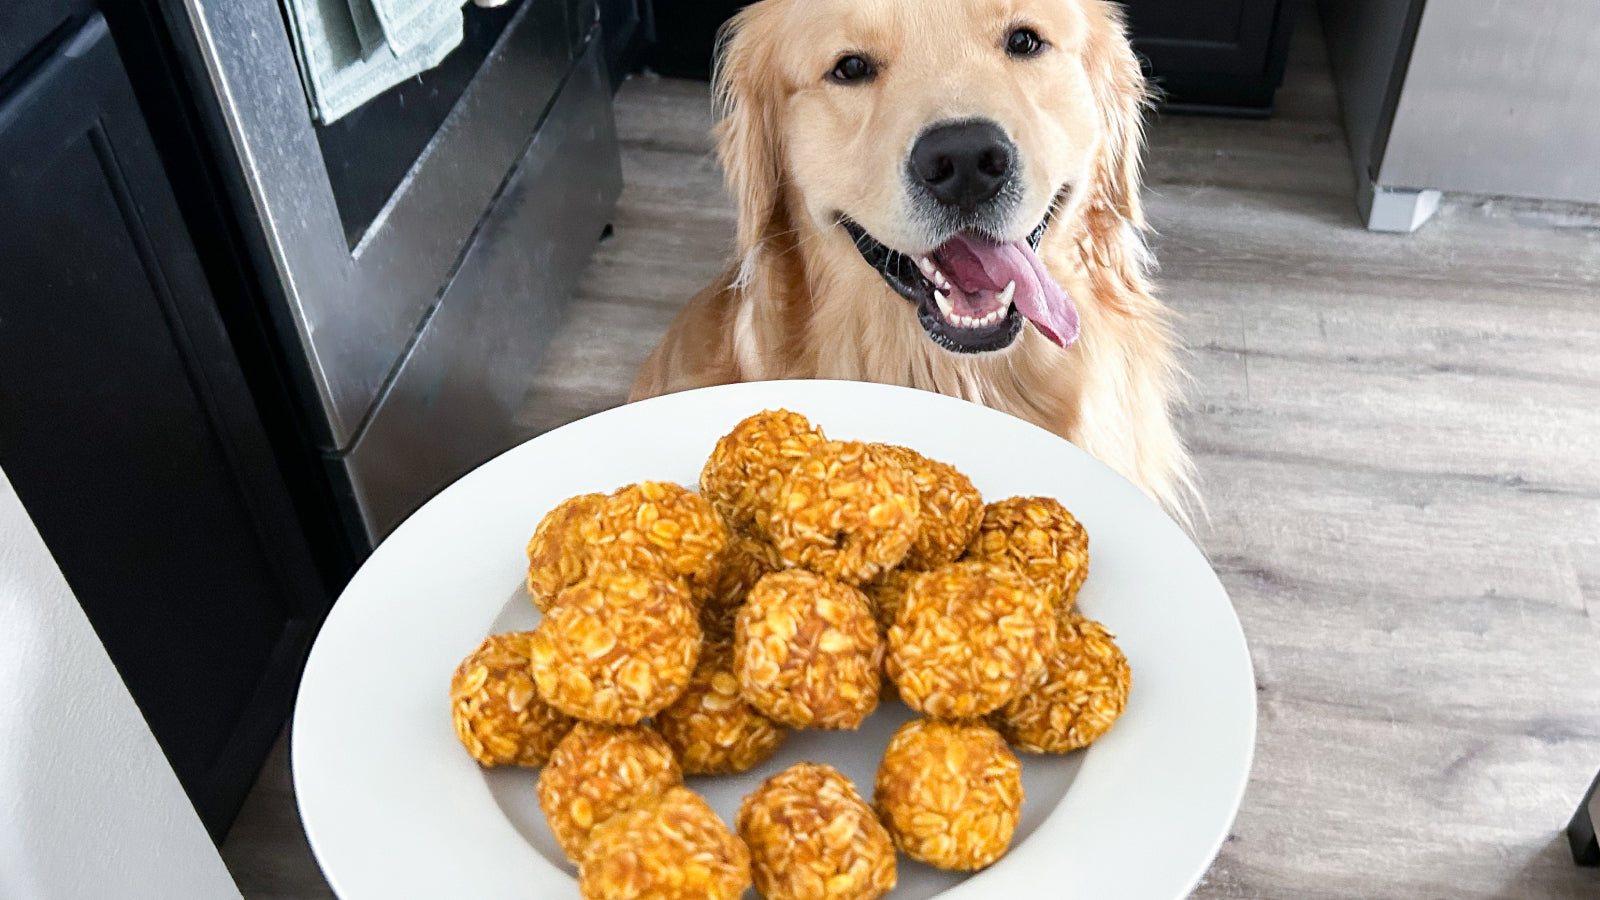 A golden retreiver with their tonque out looks at a plate of no bake pumpkin treats